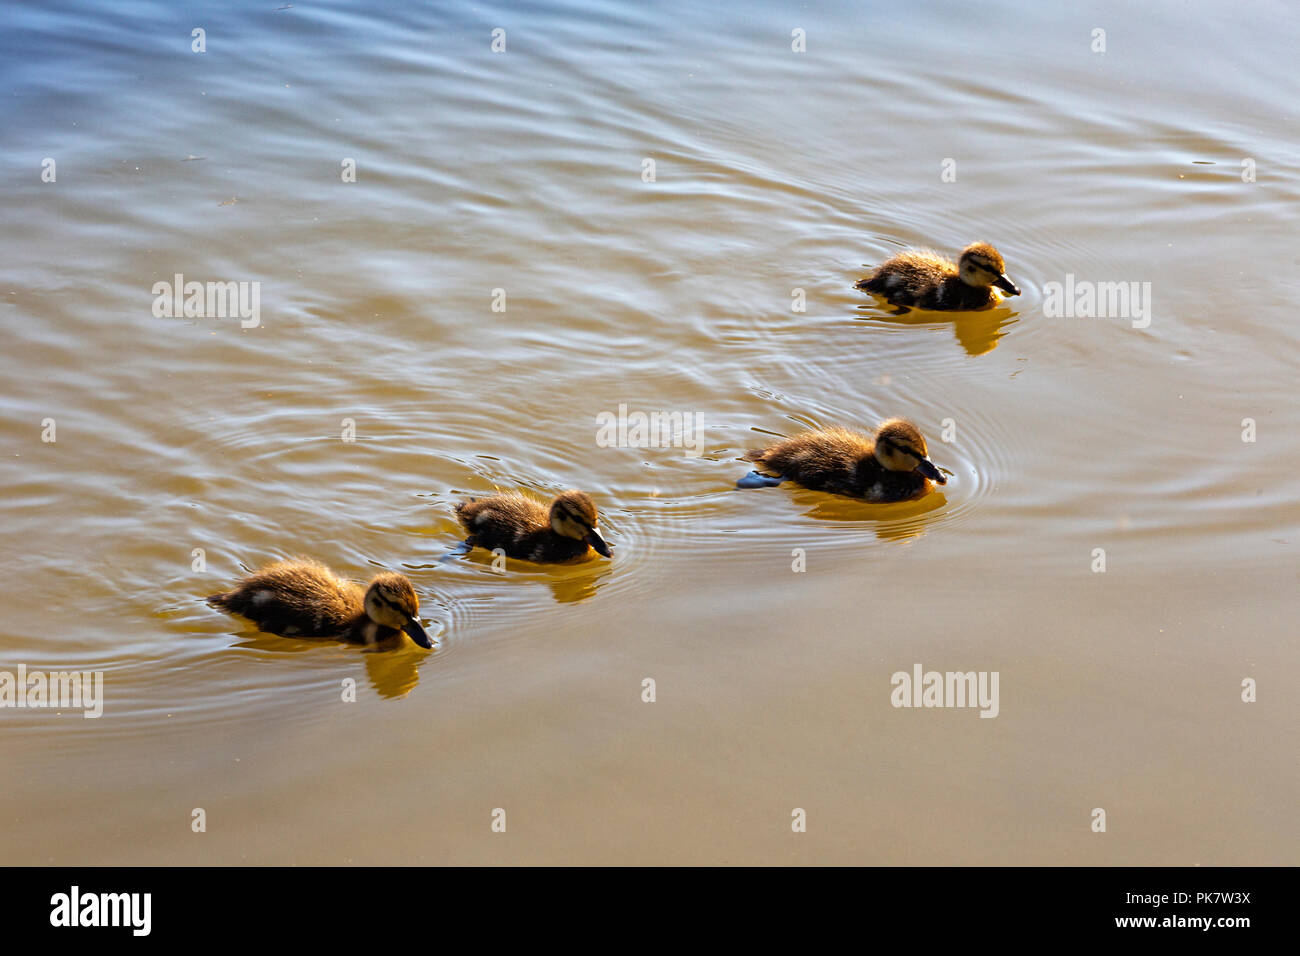 Four ducklings swimming in canal, Cheshire England UK Stock Photo